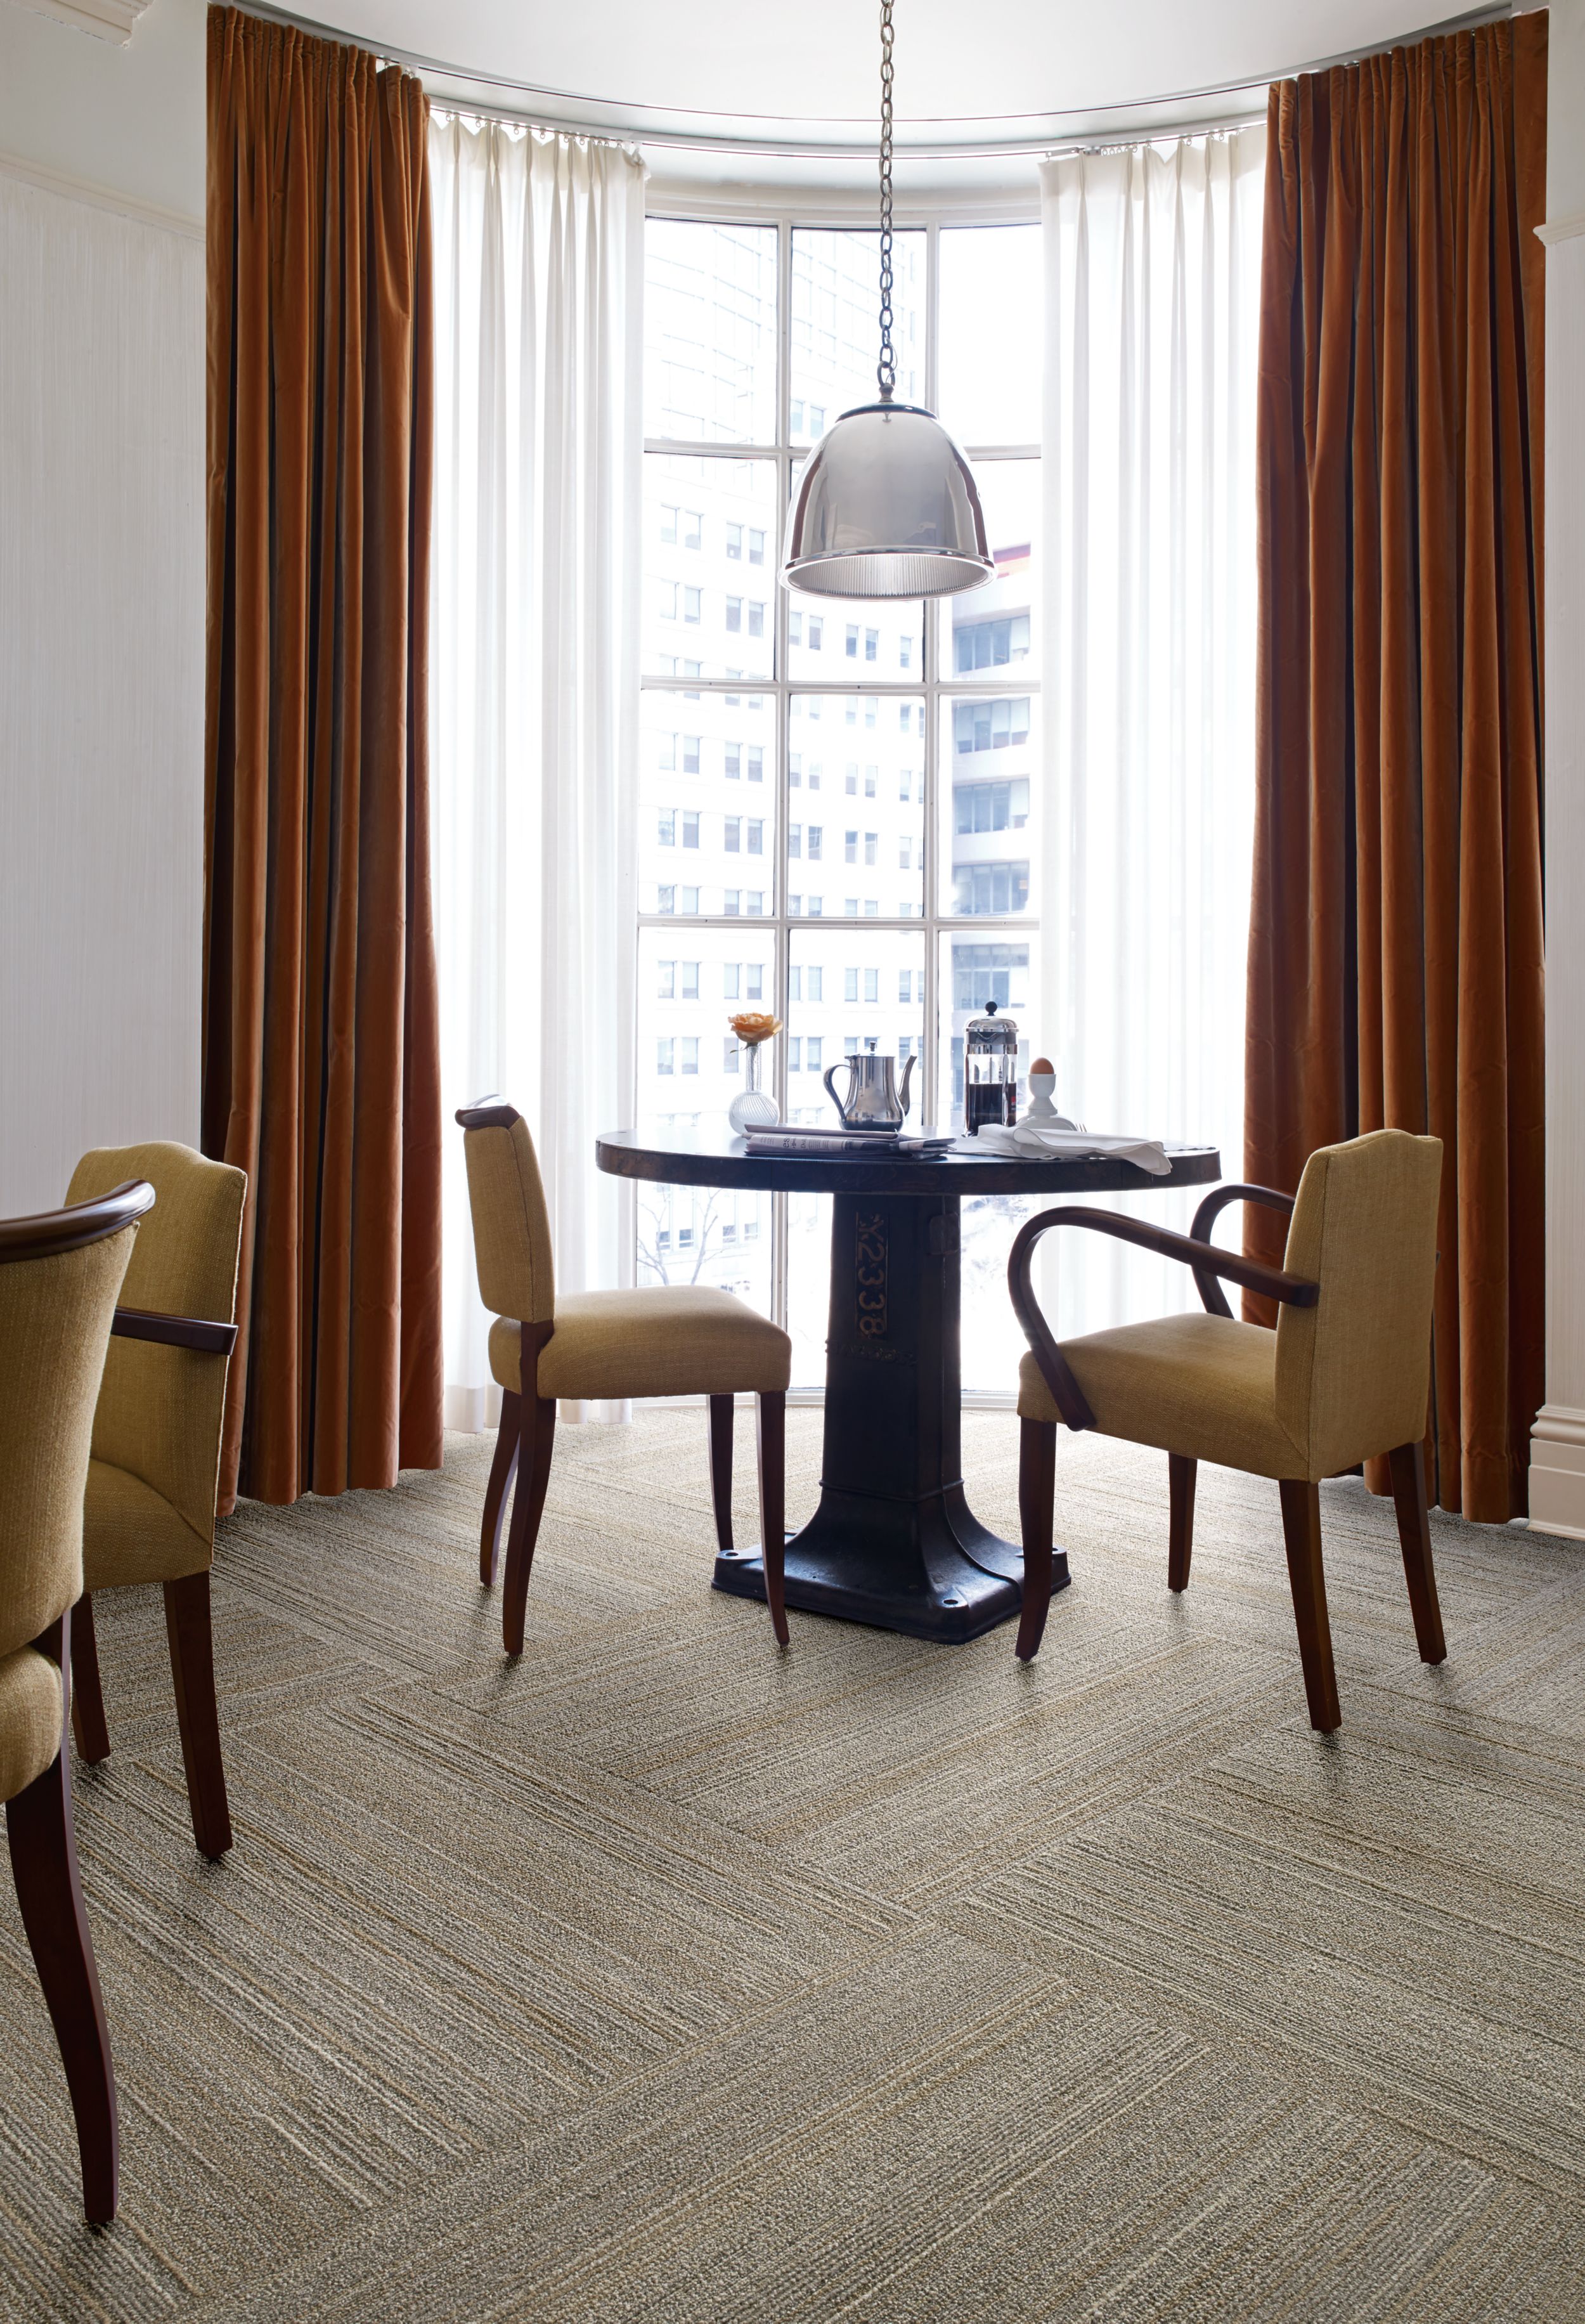 Interface NF400 plank carpet tile at small breakfast table in front of window imagen número 7